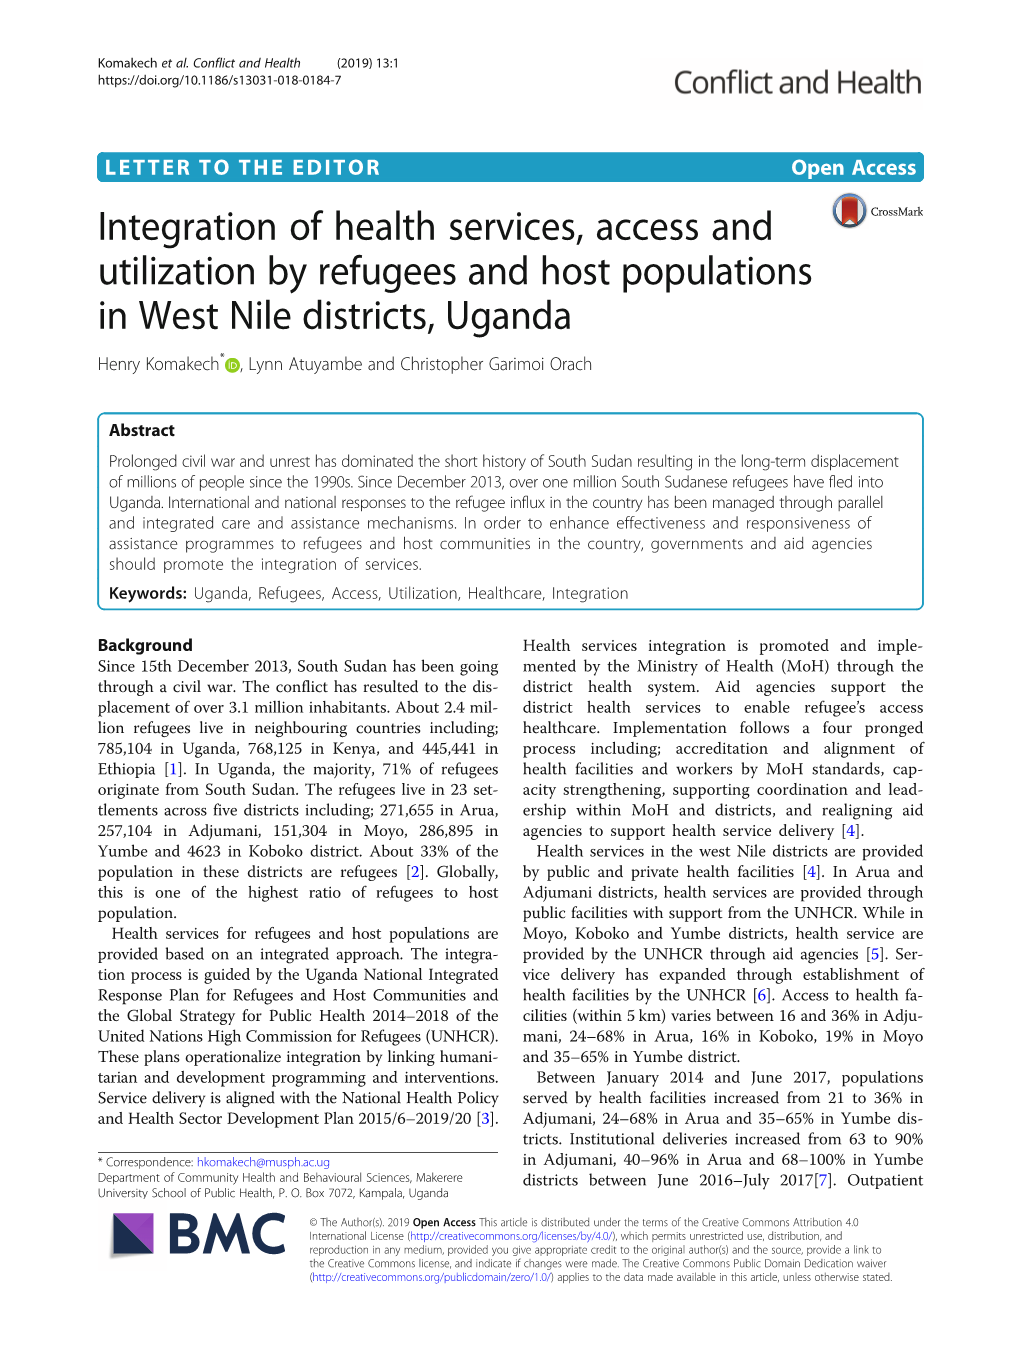 Integration of Health Services, Access and Utilization by Refugees and Host